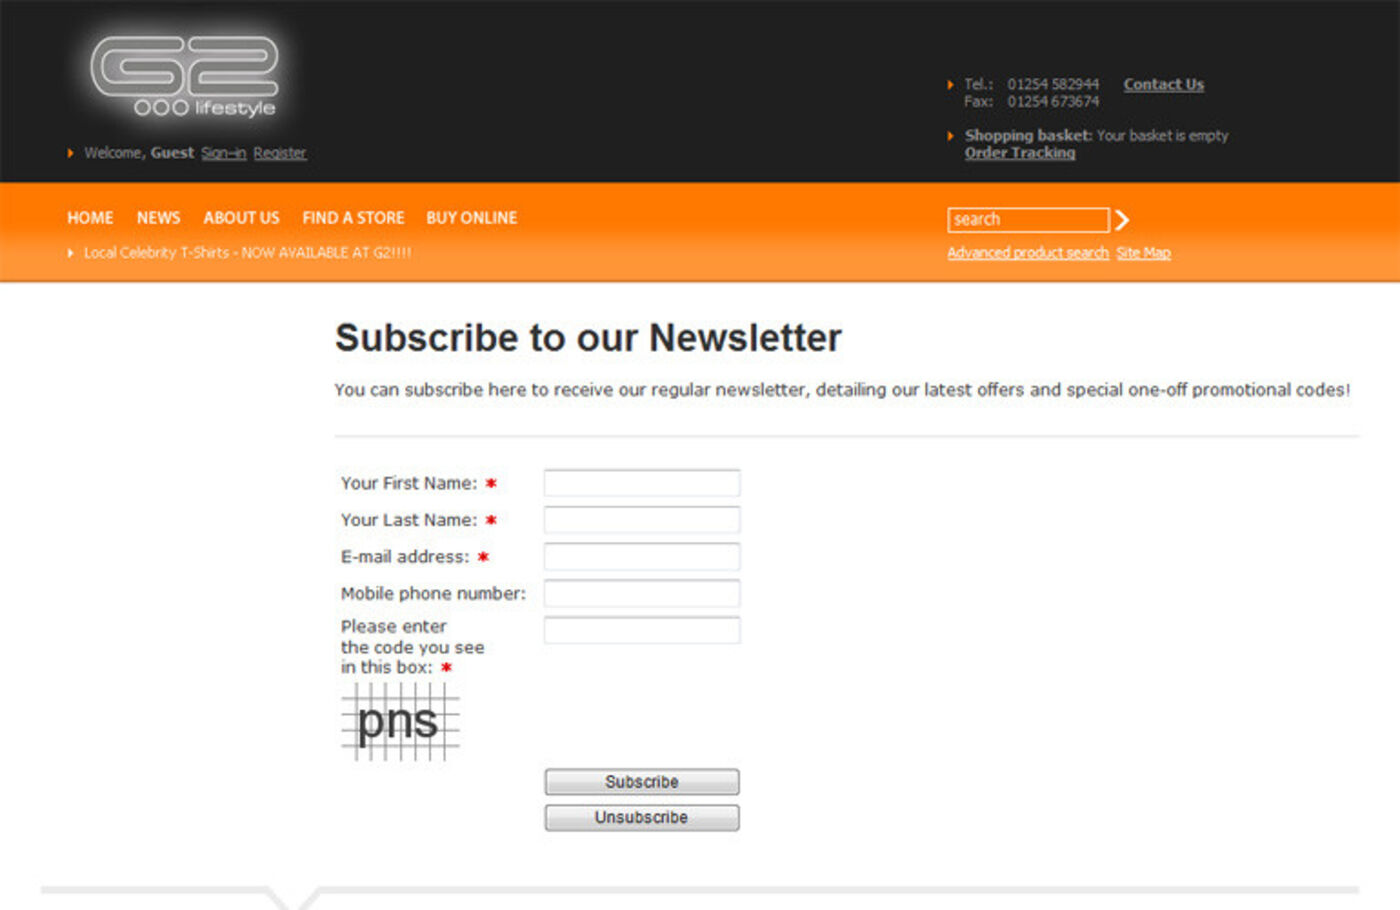 G2 Lifestyle Form: Subscribe to our Newsletter